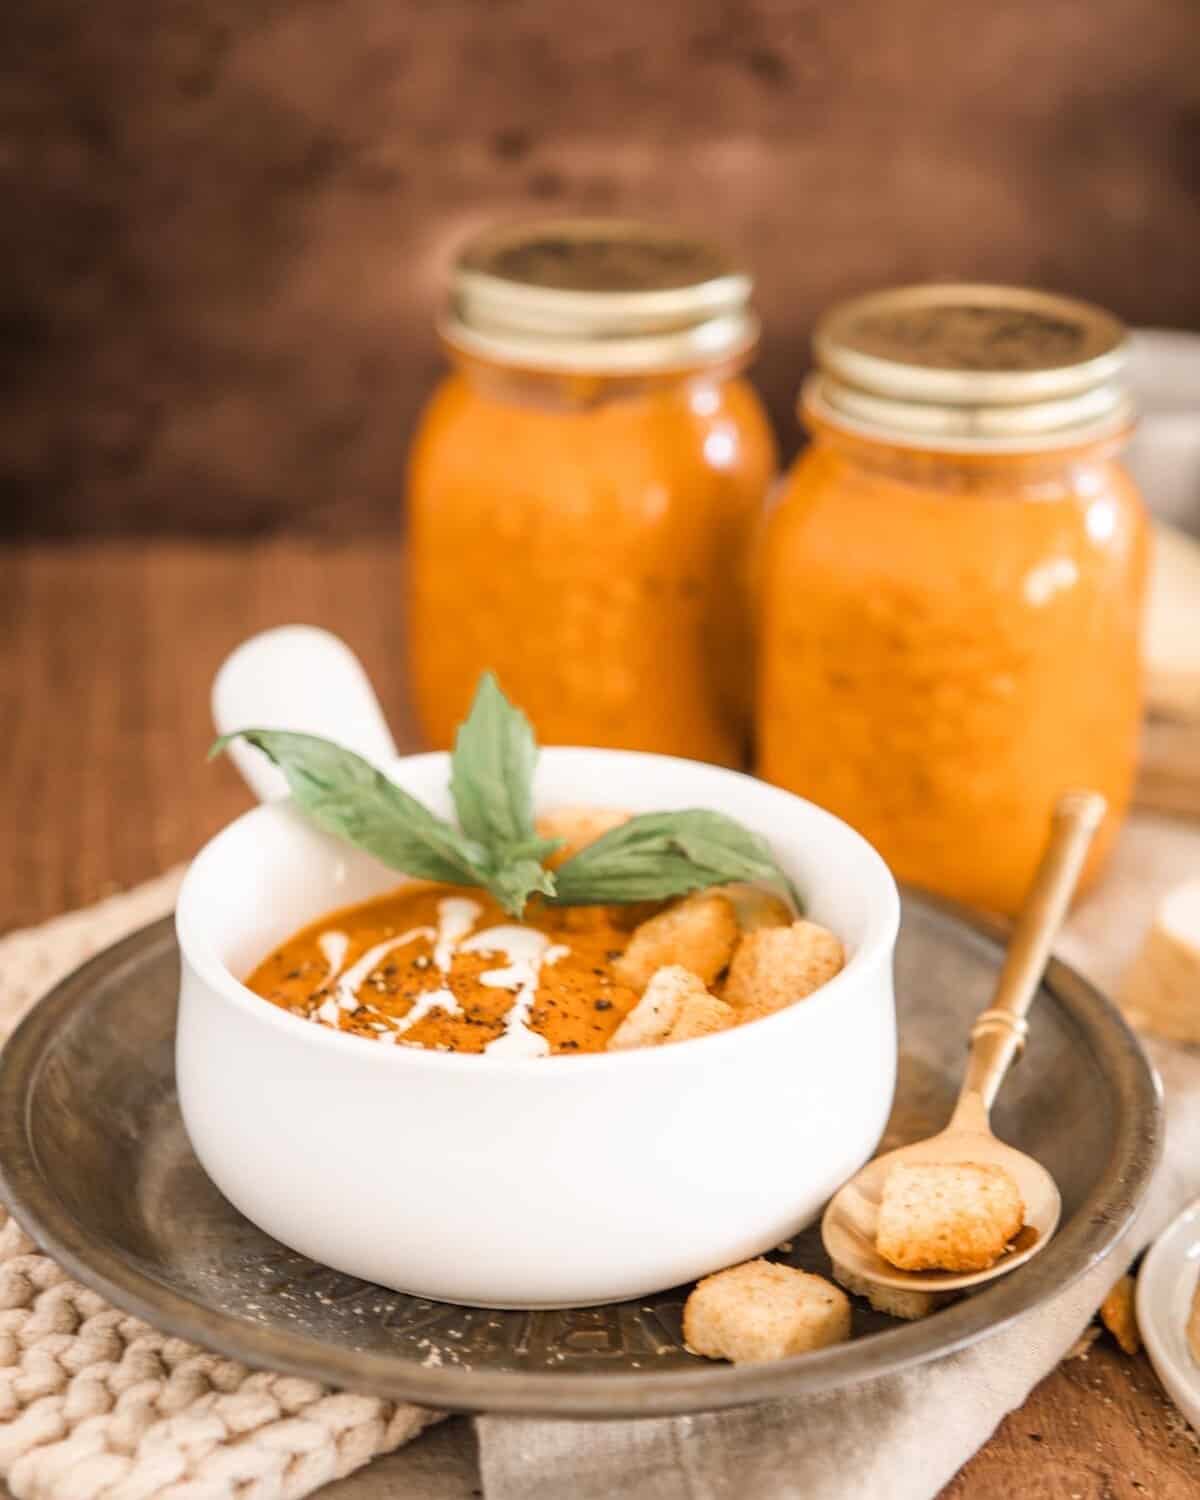 Roasted tomato soup with croutons, basil, and cream. Soup is contained in a white bowl with short handle served on a silver plate with a golden spoon. There are 2 jars of soup in the background